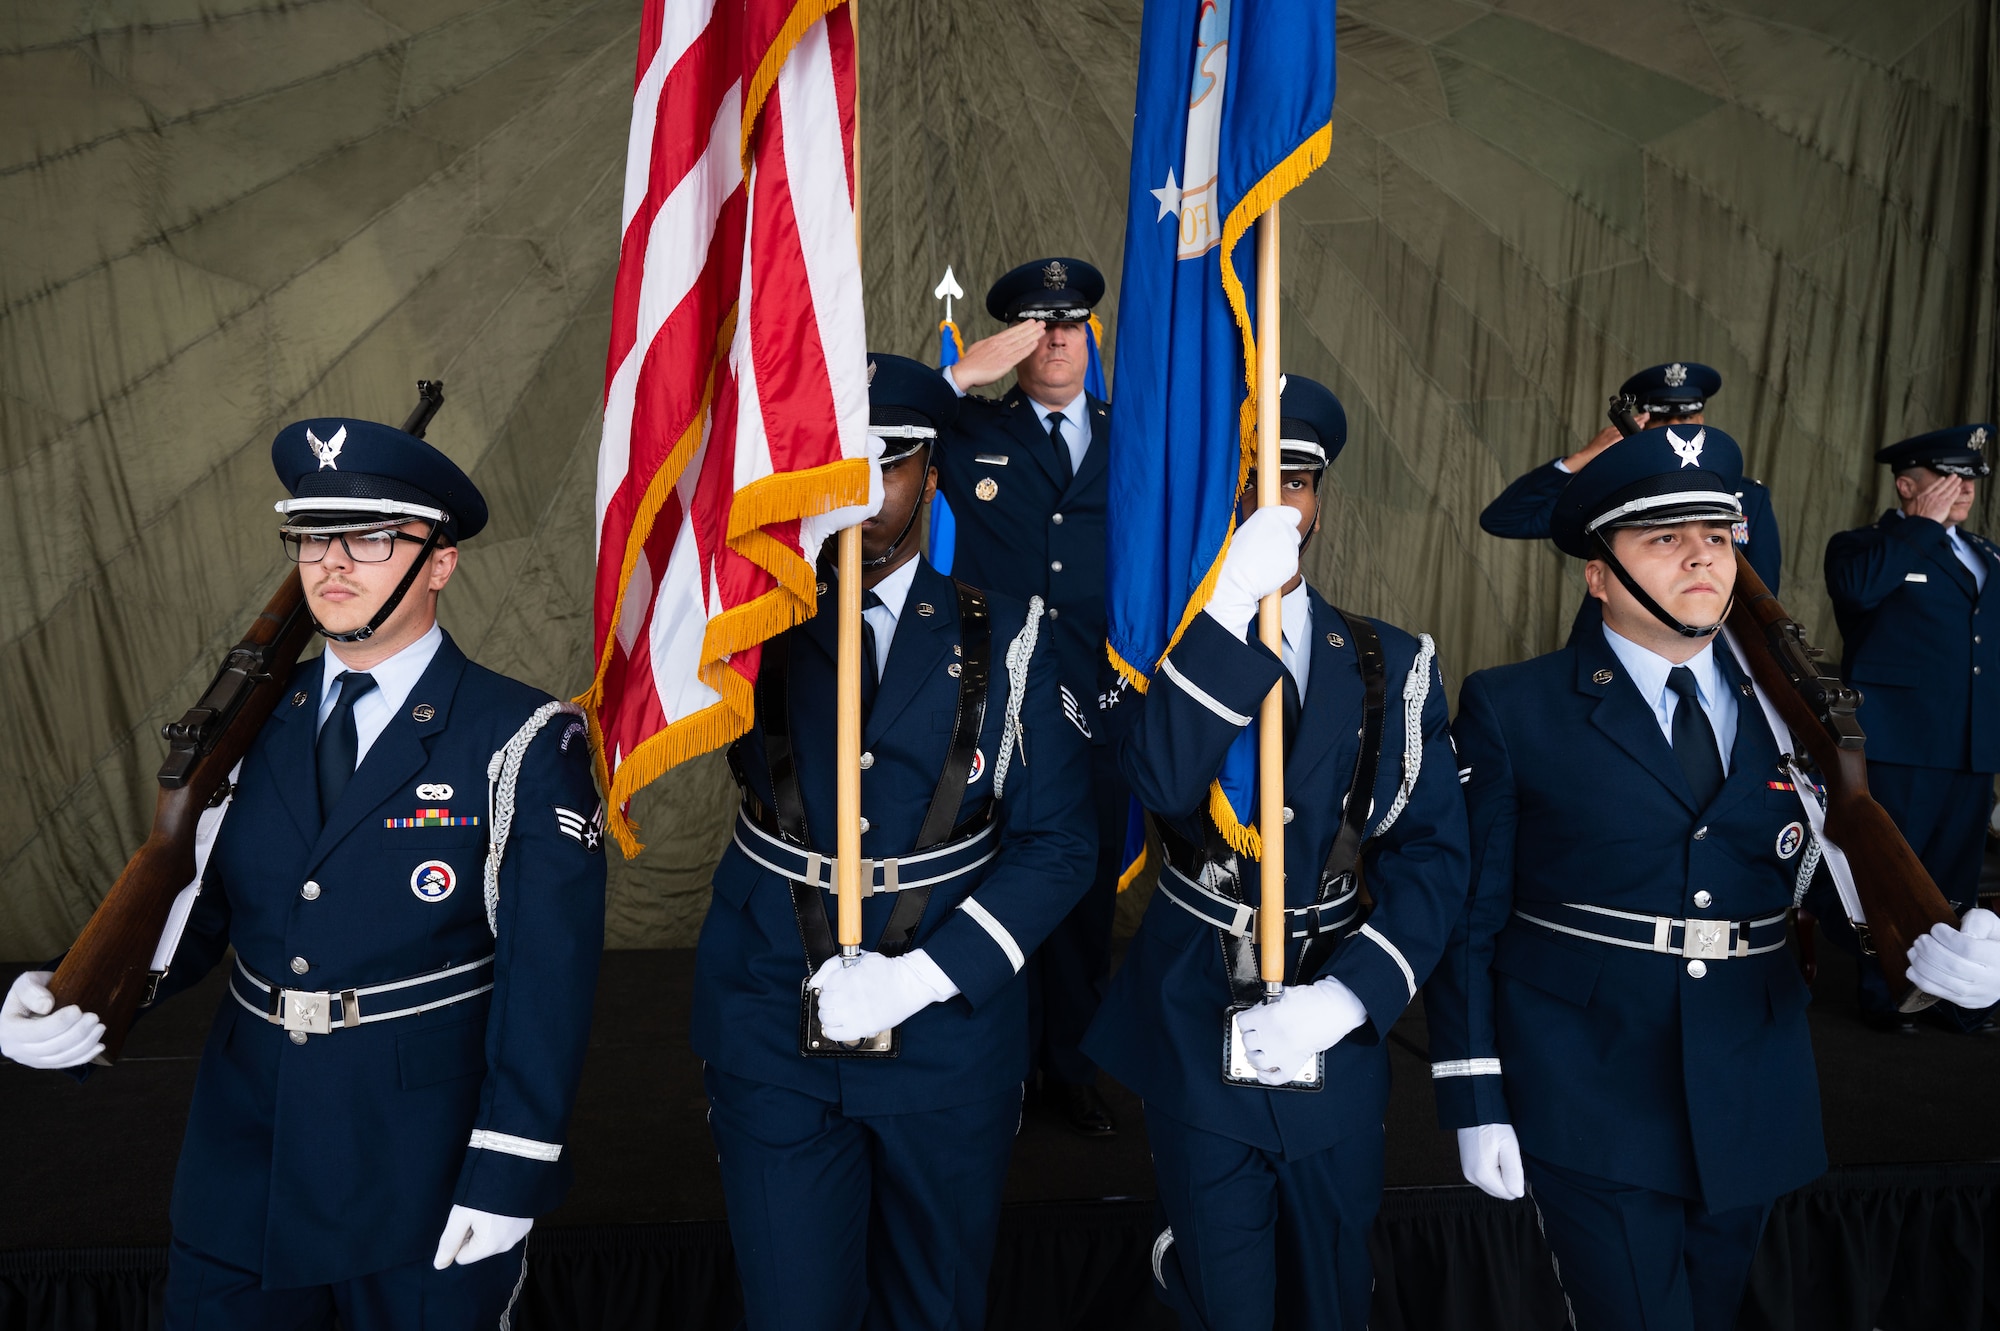 U.S. Air Force Lt. Gen. Tony Bauernfeind, Air Force Special Operations Command commander, salutes during the change of command ceremony at Cannon Air Force Base, New Mexico, May 24, 2023.